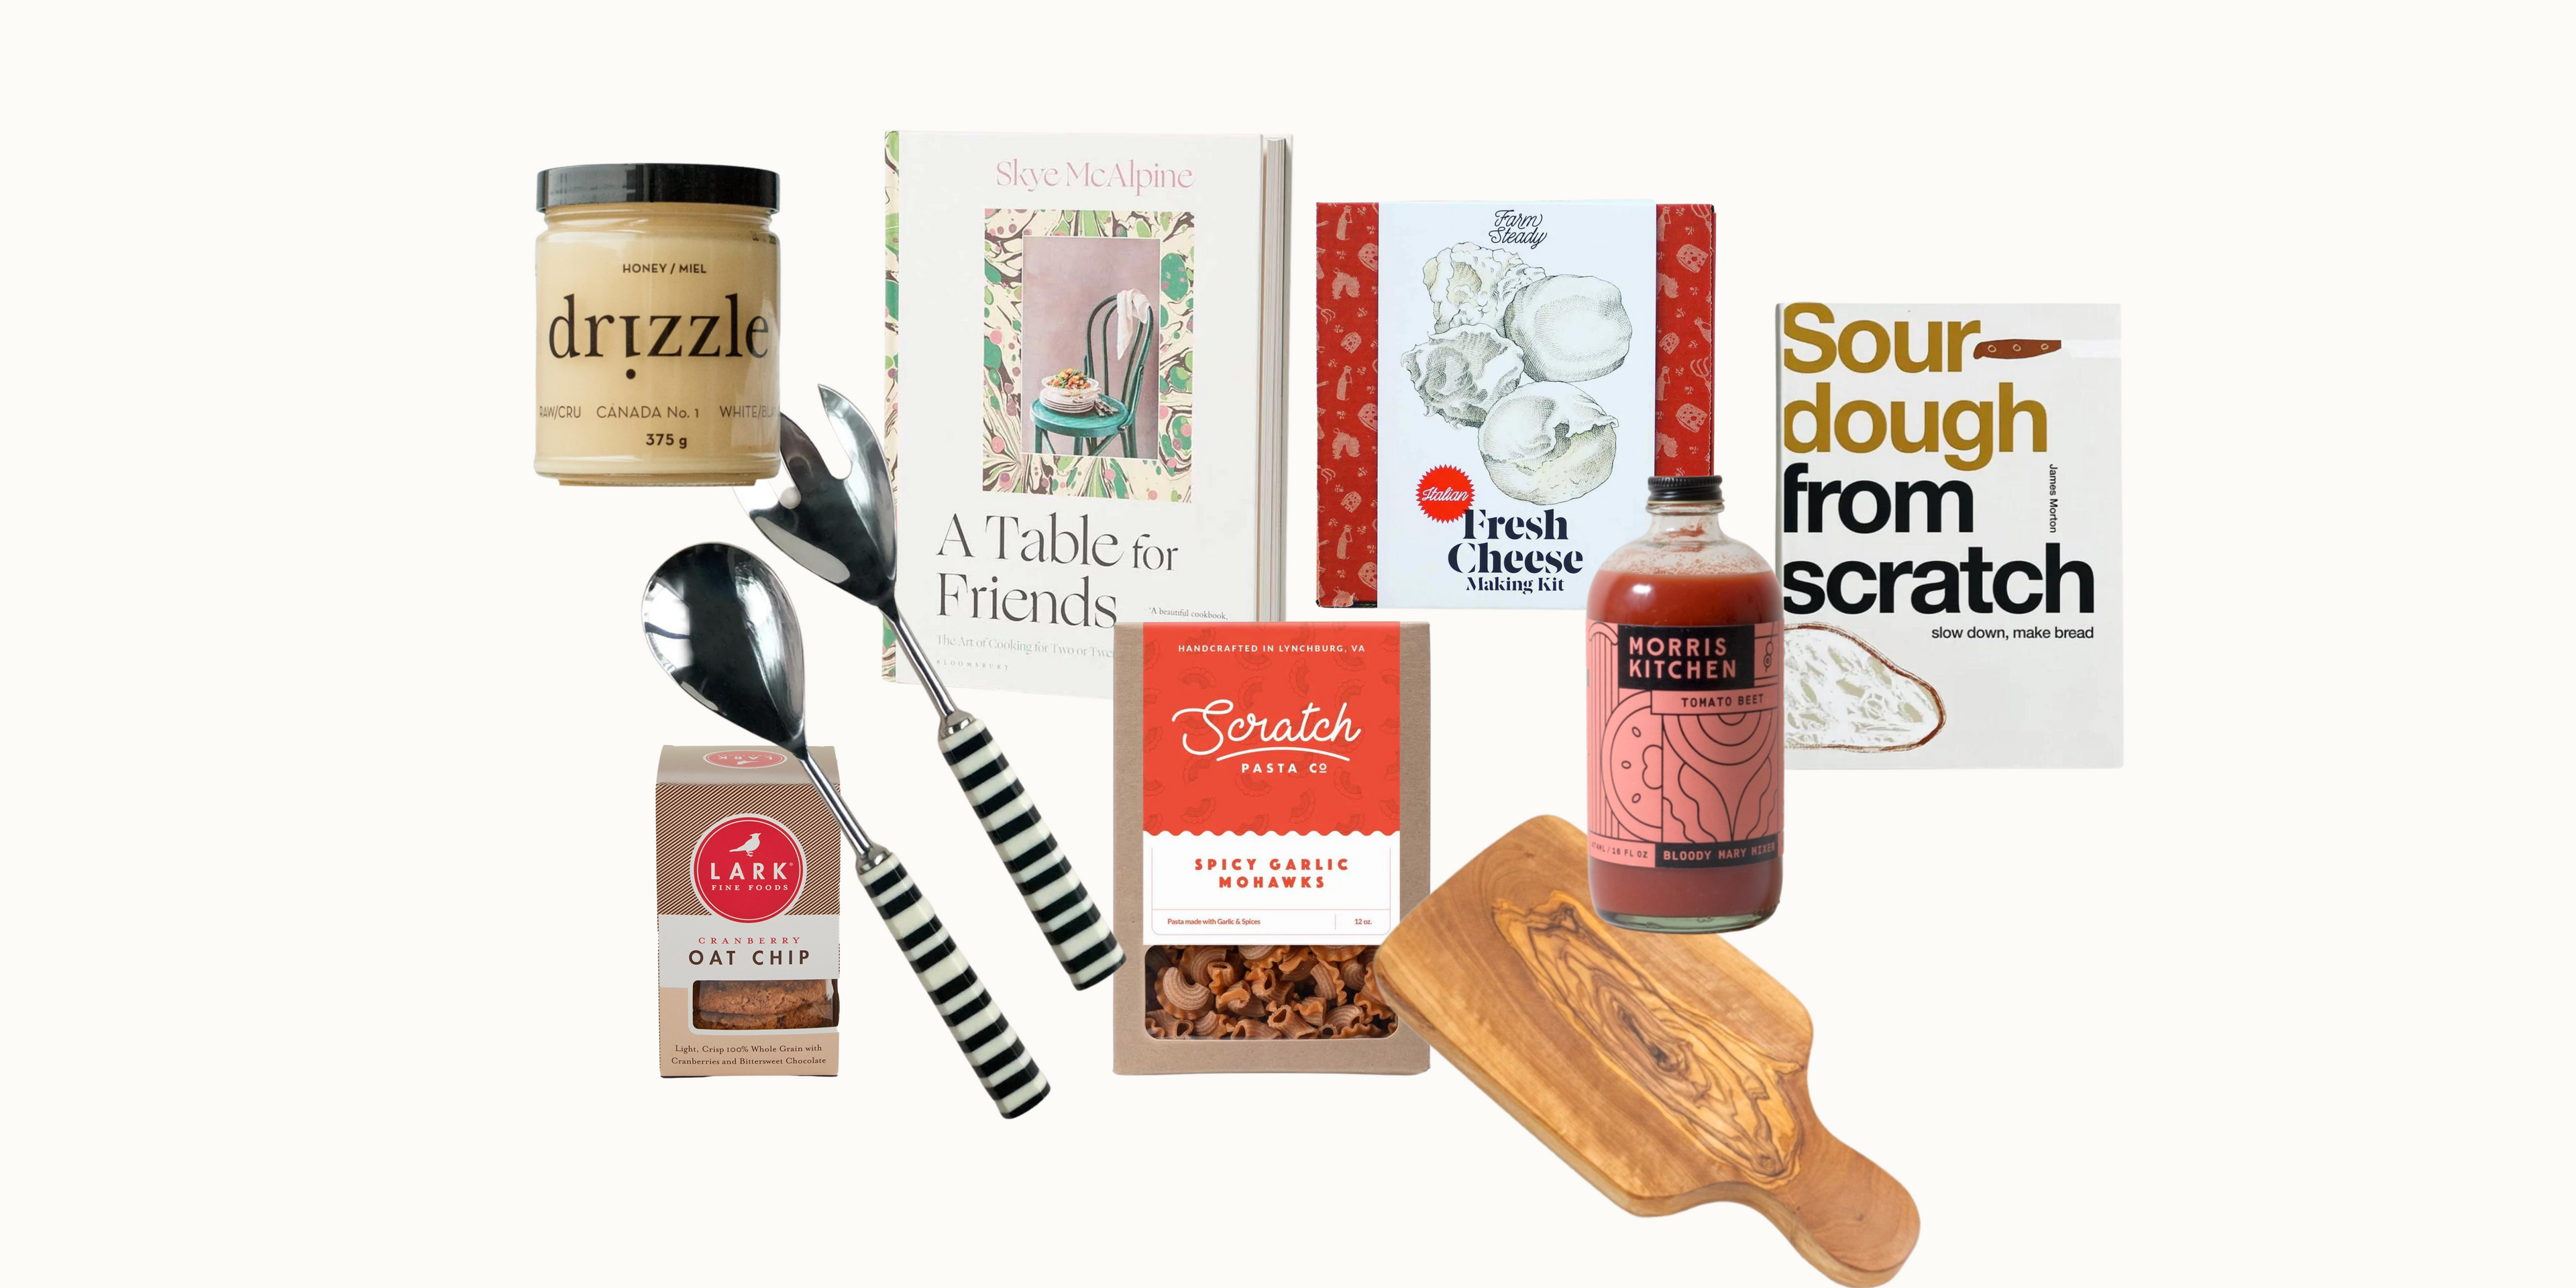 Bocu Holiday Gift Guide - Gifts for your Sister or Best Friend, Foodies and Food Lovers